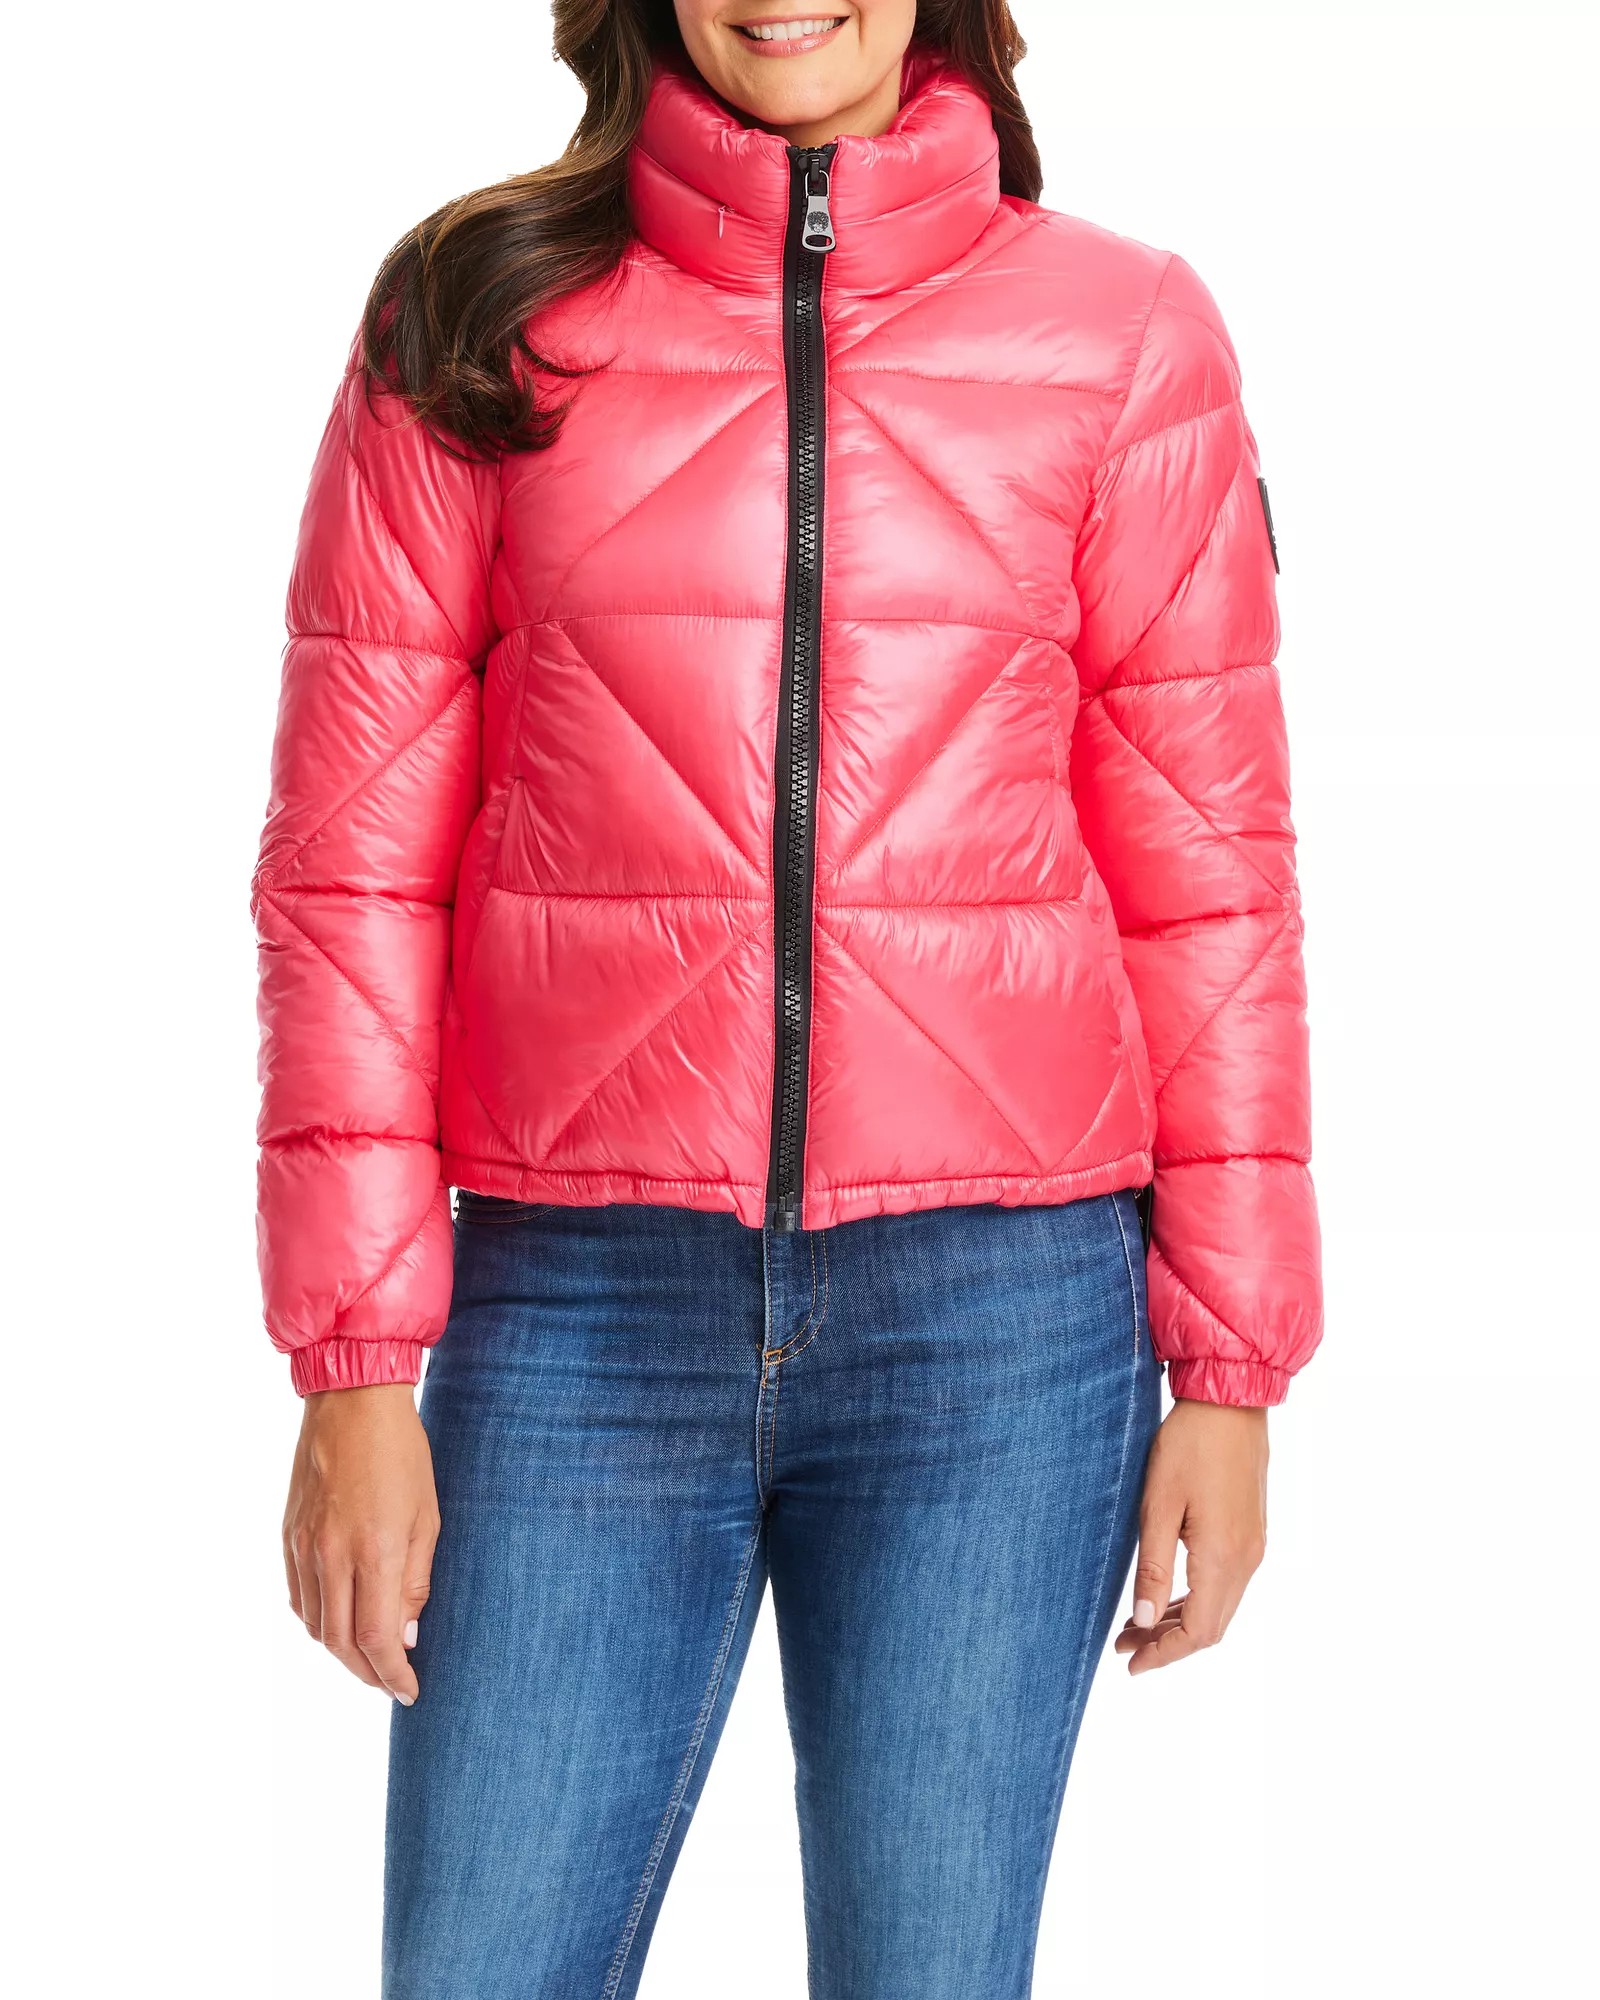 Women's Vince Camuto Triangle Quilted Puffer Jacket Size Medium Hot Pink